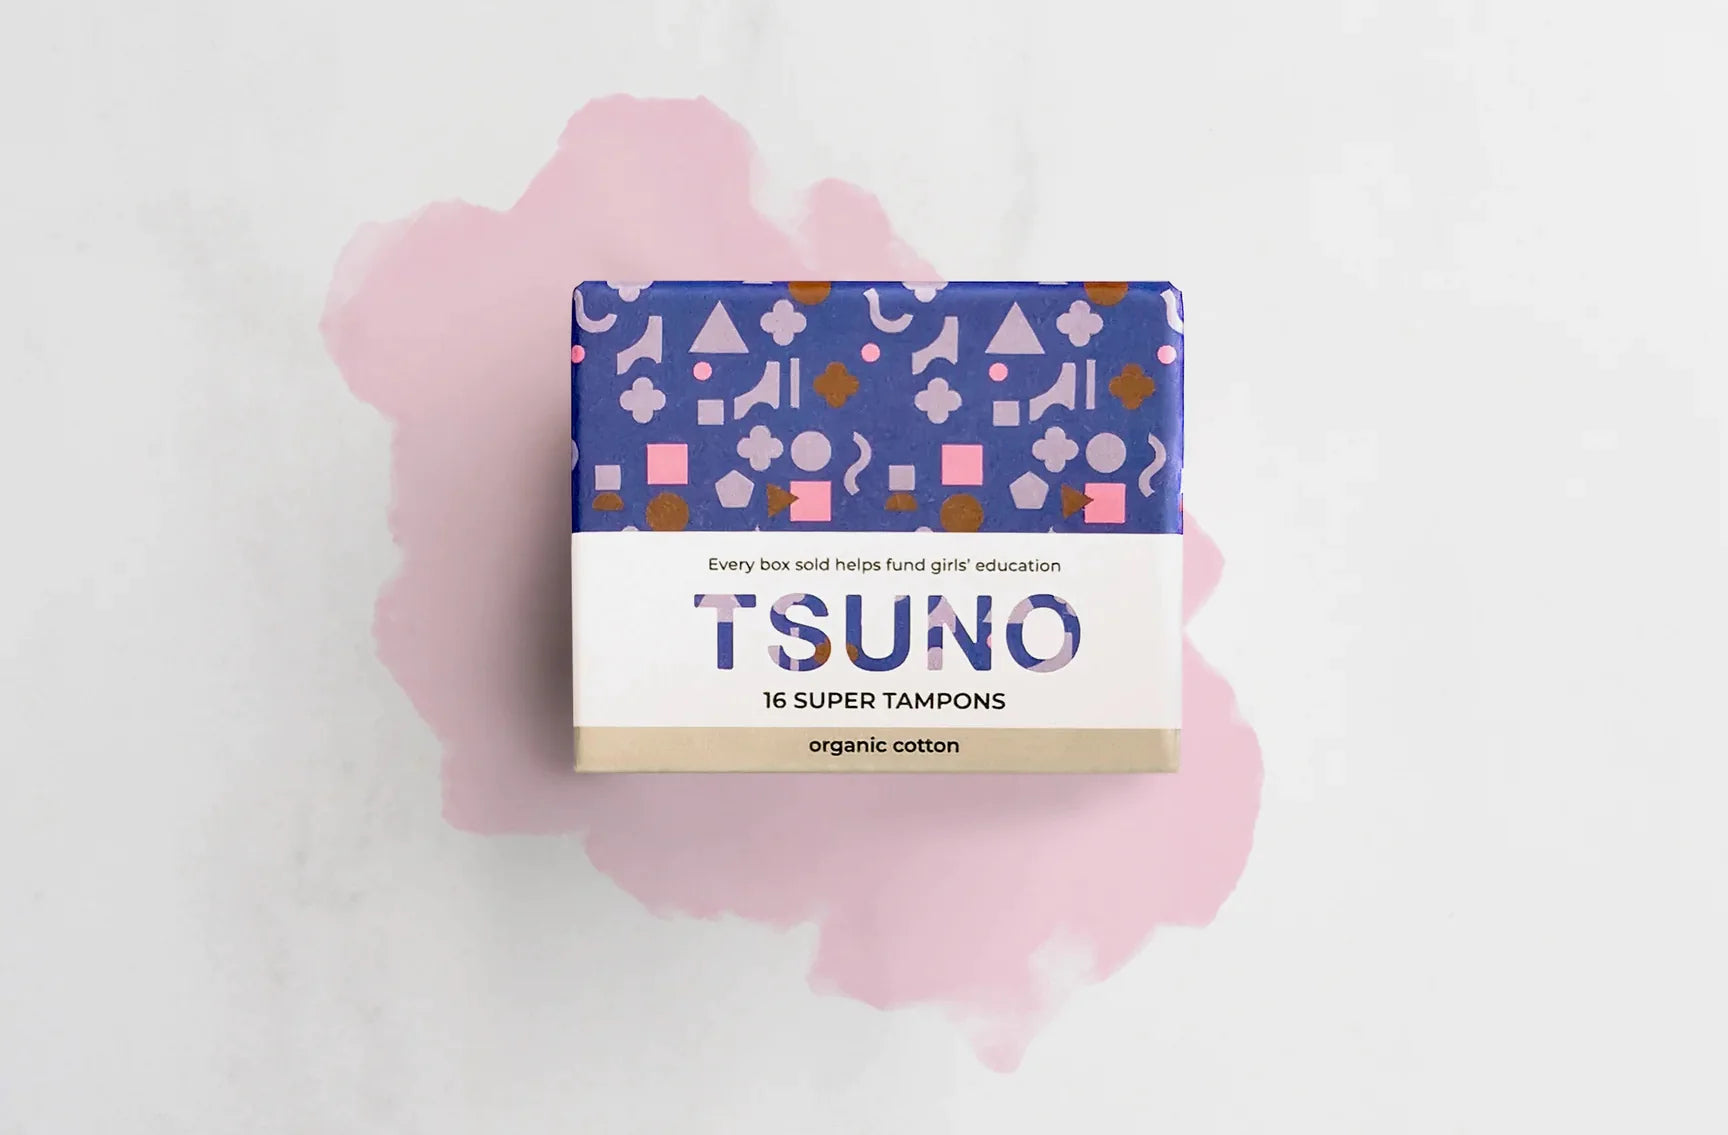 A box of organic tampons by Tsuno